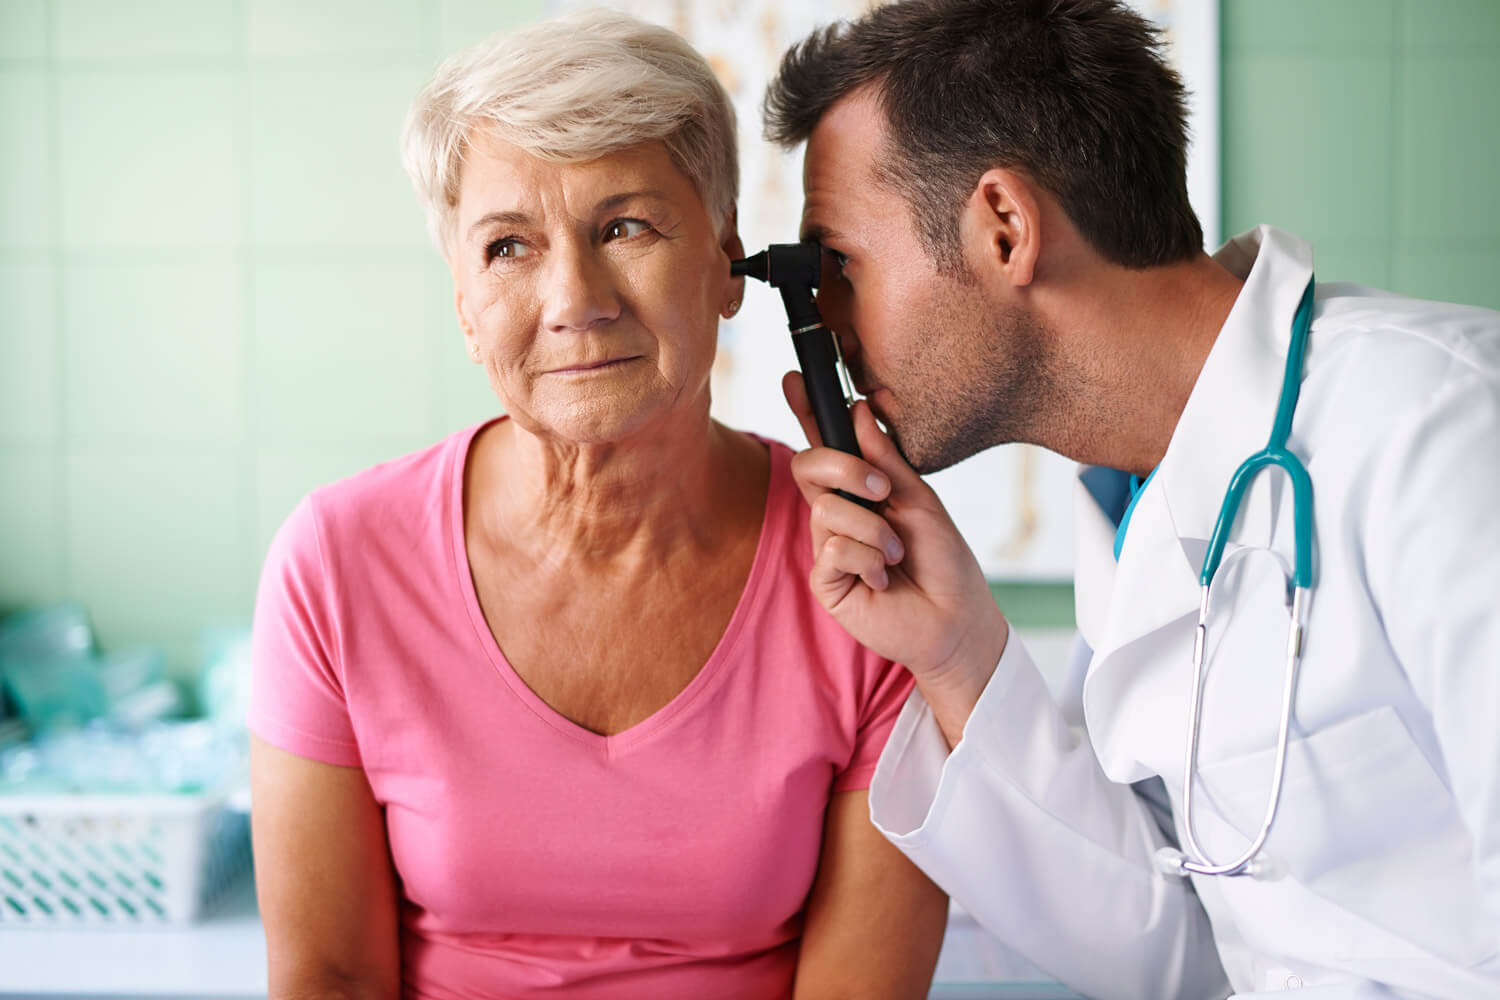 Hearing Screening for Older Adults With Cognitive Impairment: A Systematic Review